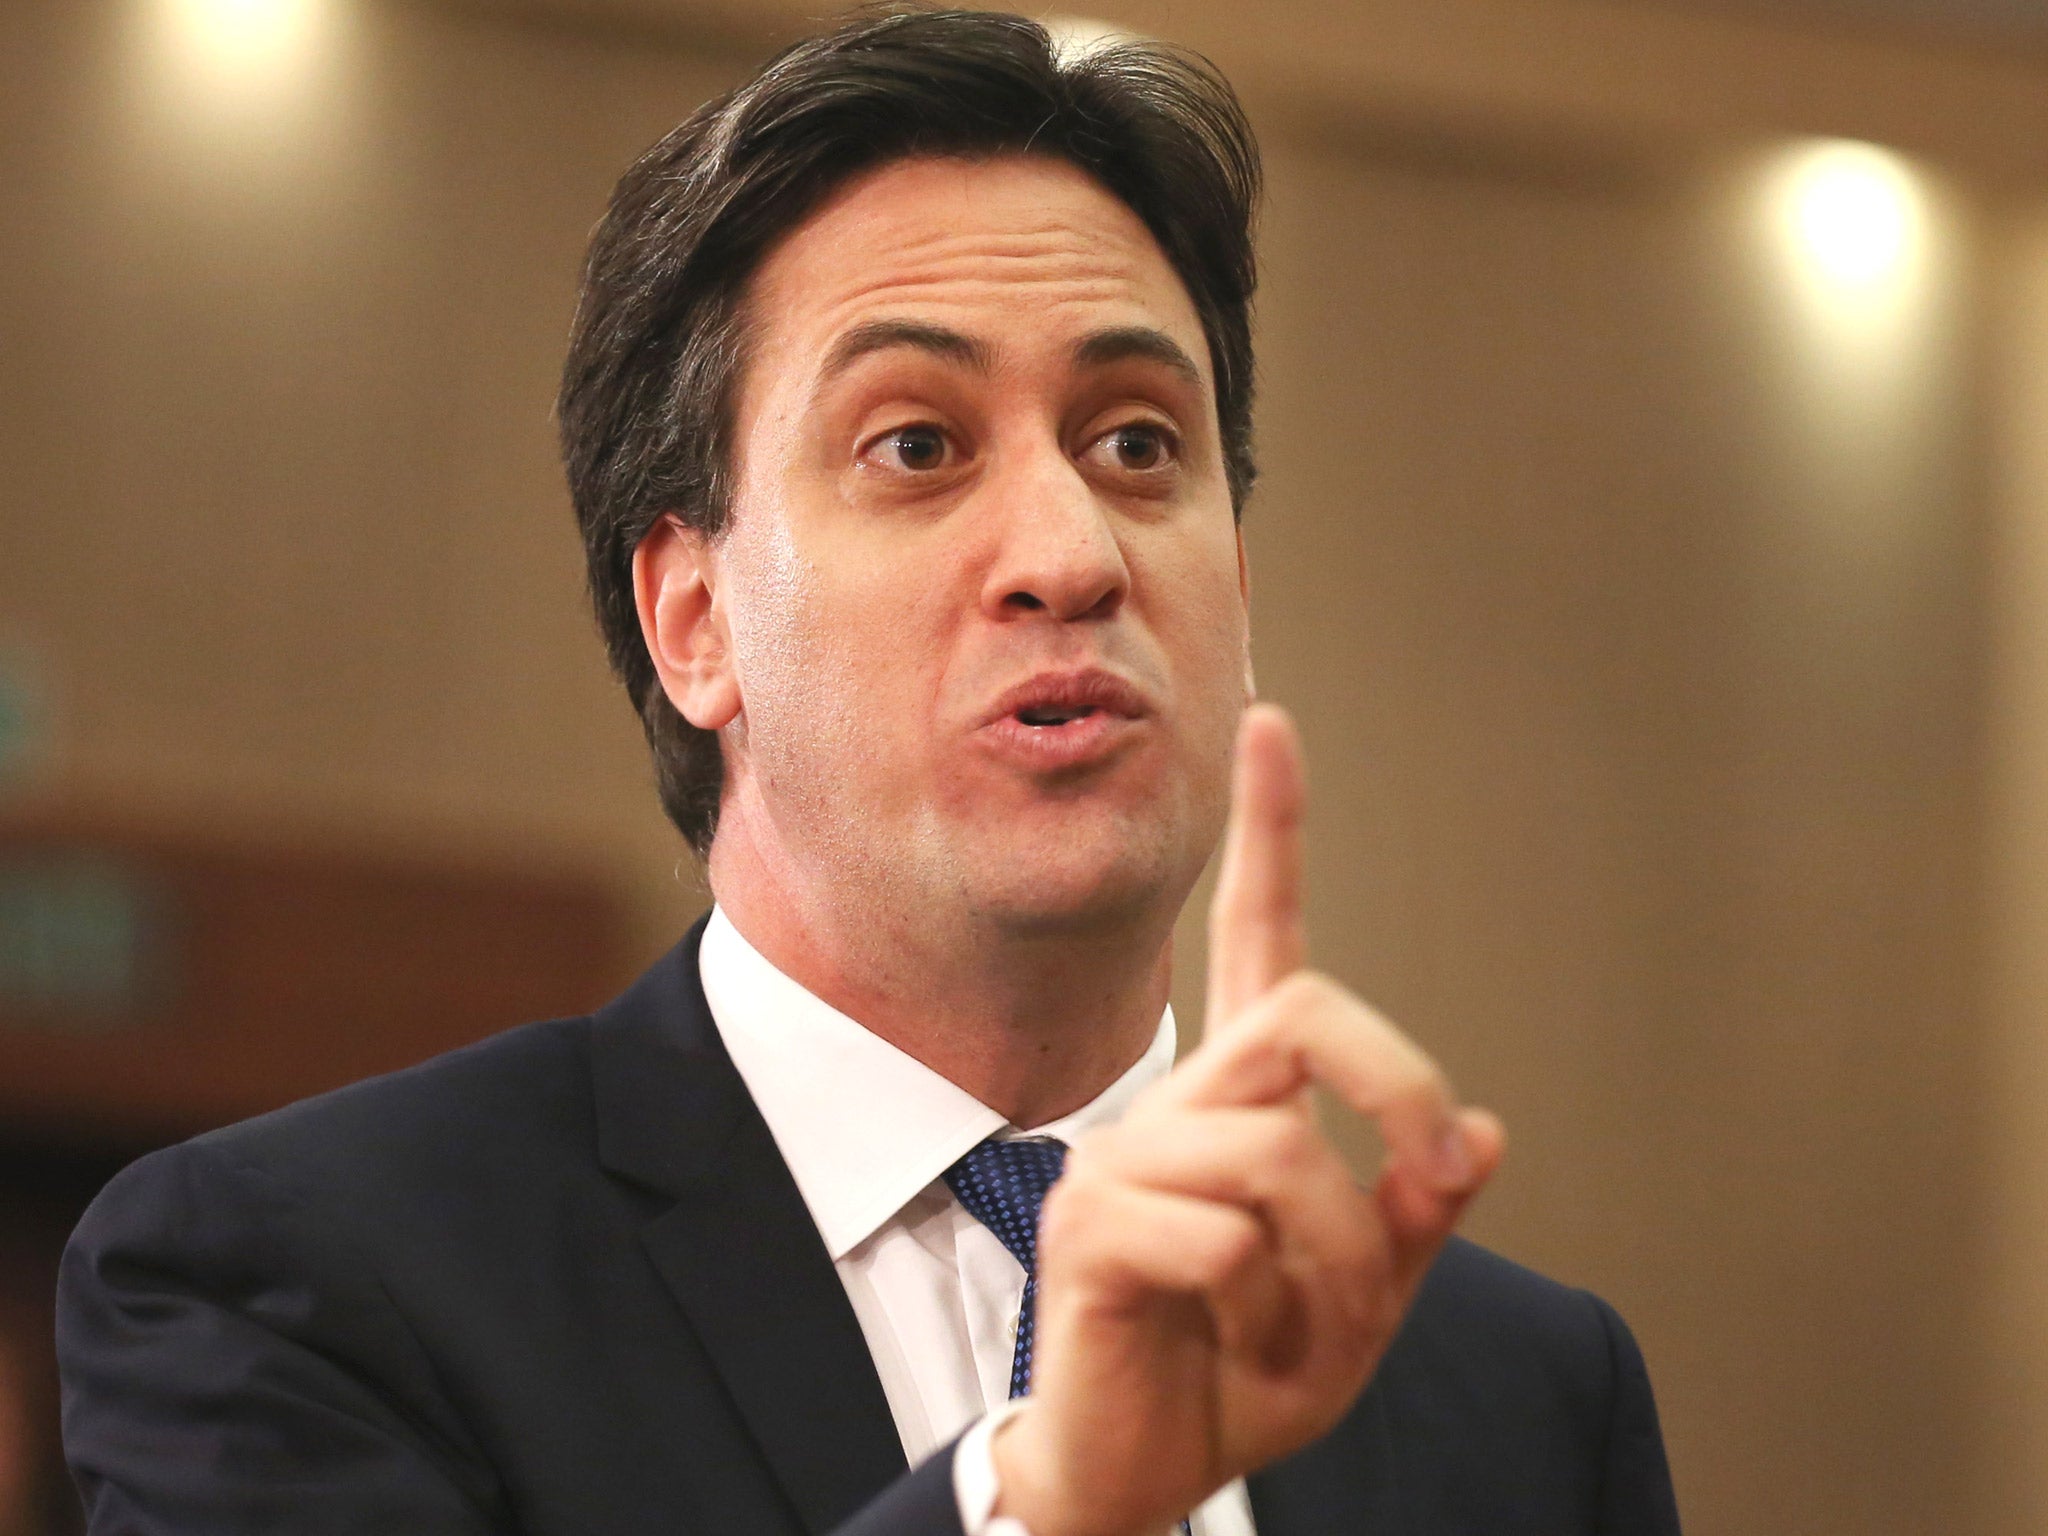 Ed Miliband's shake-up does not yet appear to have made the desired impact